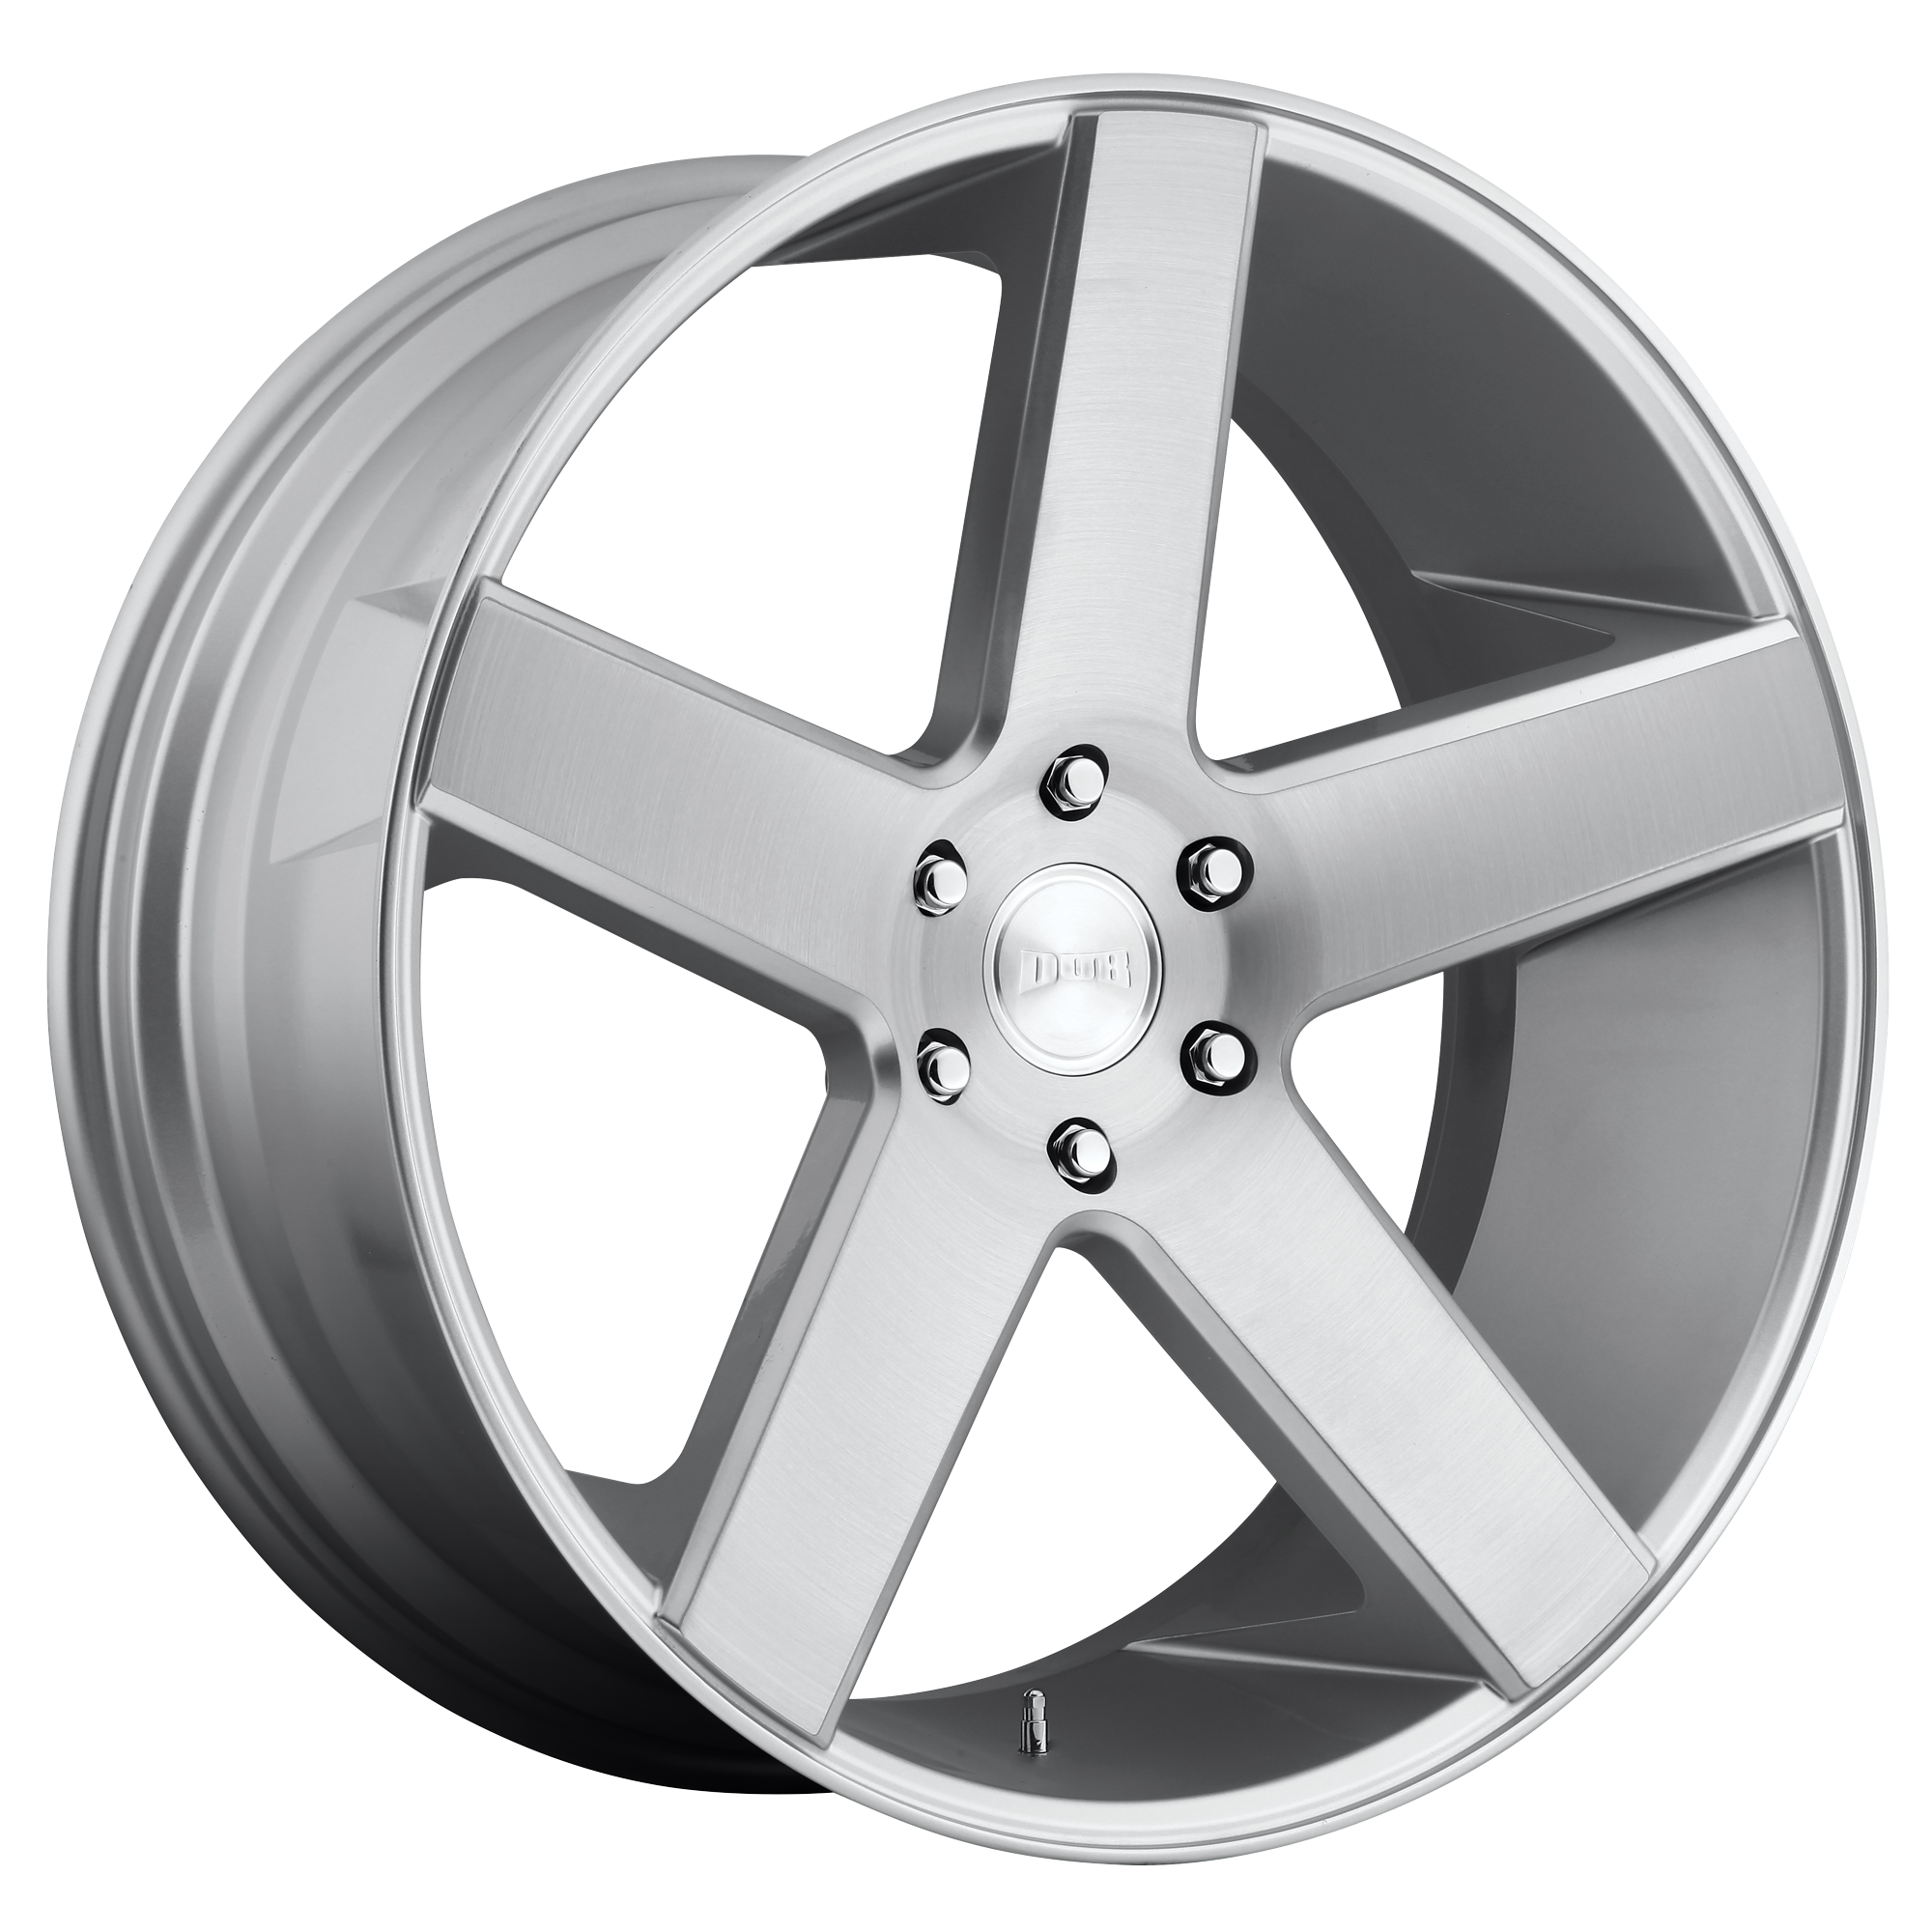 BALLER 24x10 6x139.70 GLOSS SILVER BRUSHED (19 mm) - Tires and Engine Performance